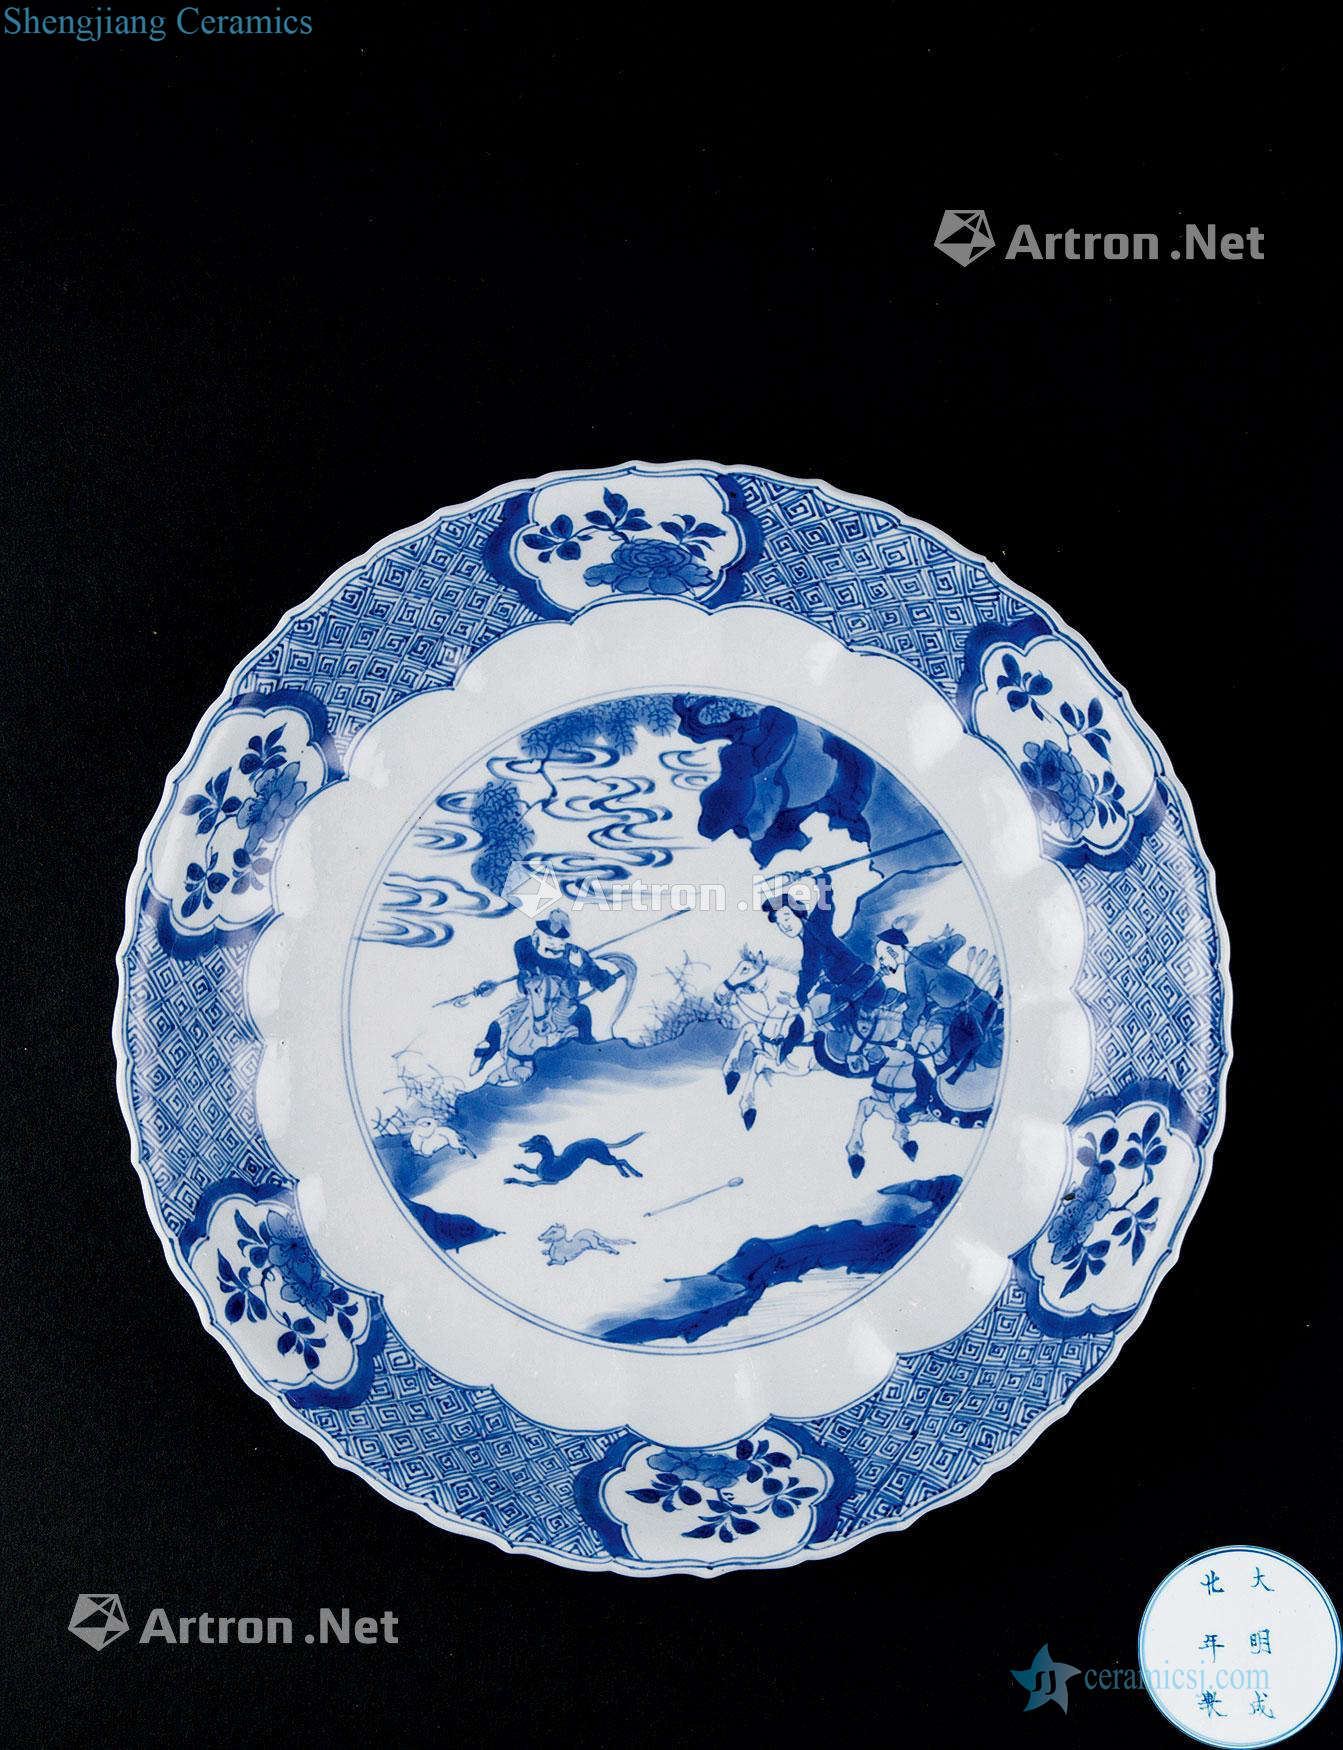 In the qing dynasty (1644-1911) blue and white flower hunting grain mouth tray